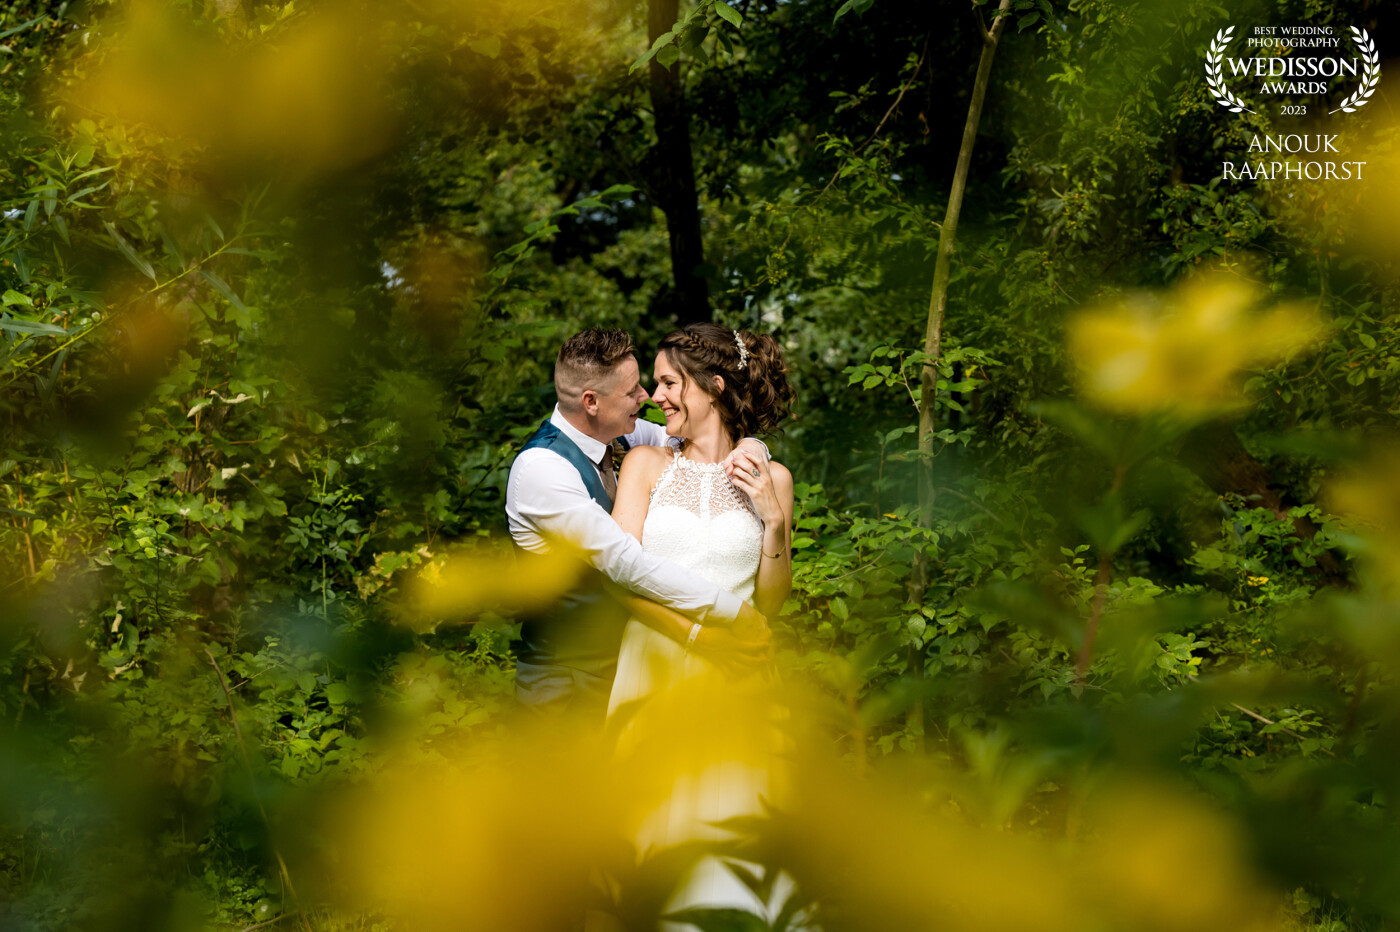 Shoot throughs during a bridal reportage / loveshoot is one of my favorite activities. In this way you create real paintings with beautiful frames. I did this loveshoot at a beautiful flower garden with the yellow flowers out of focus